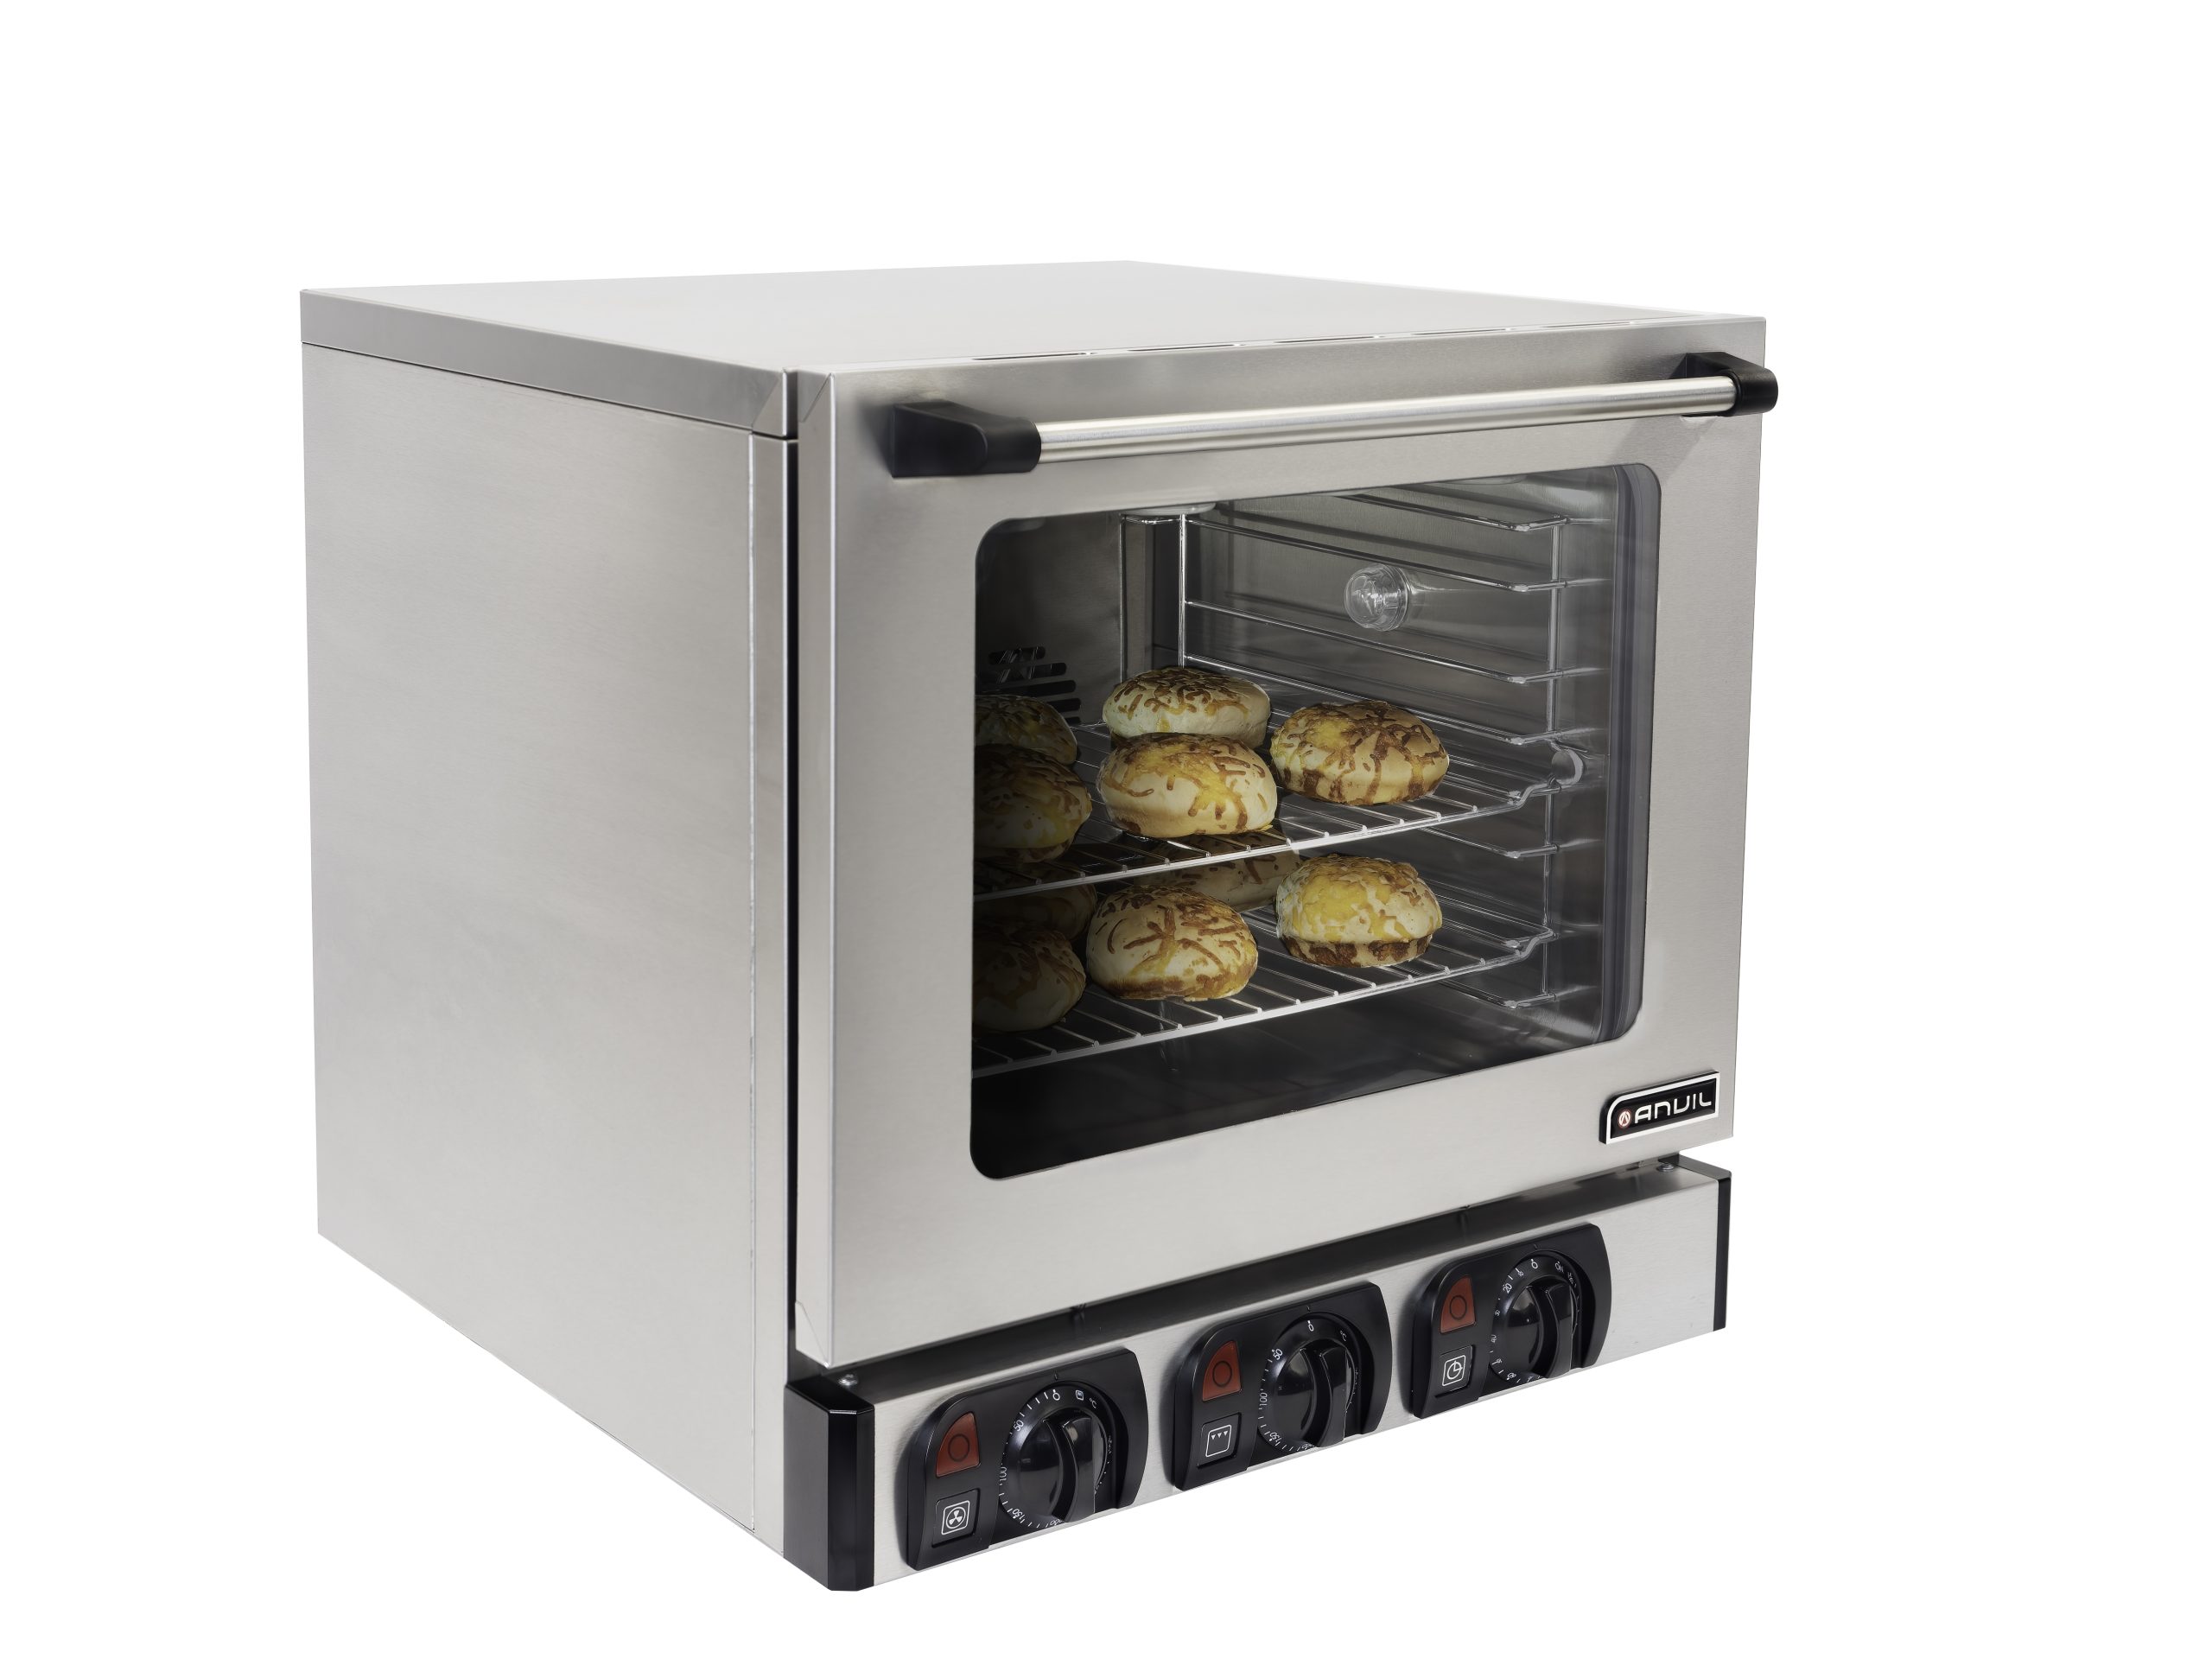 Anvil Convection Oven – Prima Pro With Grill